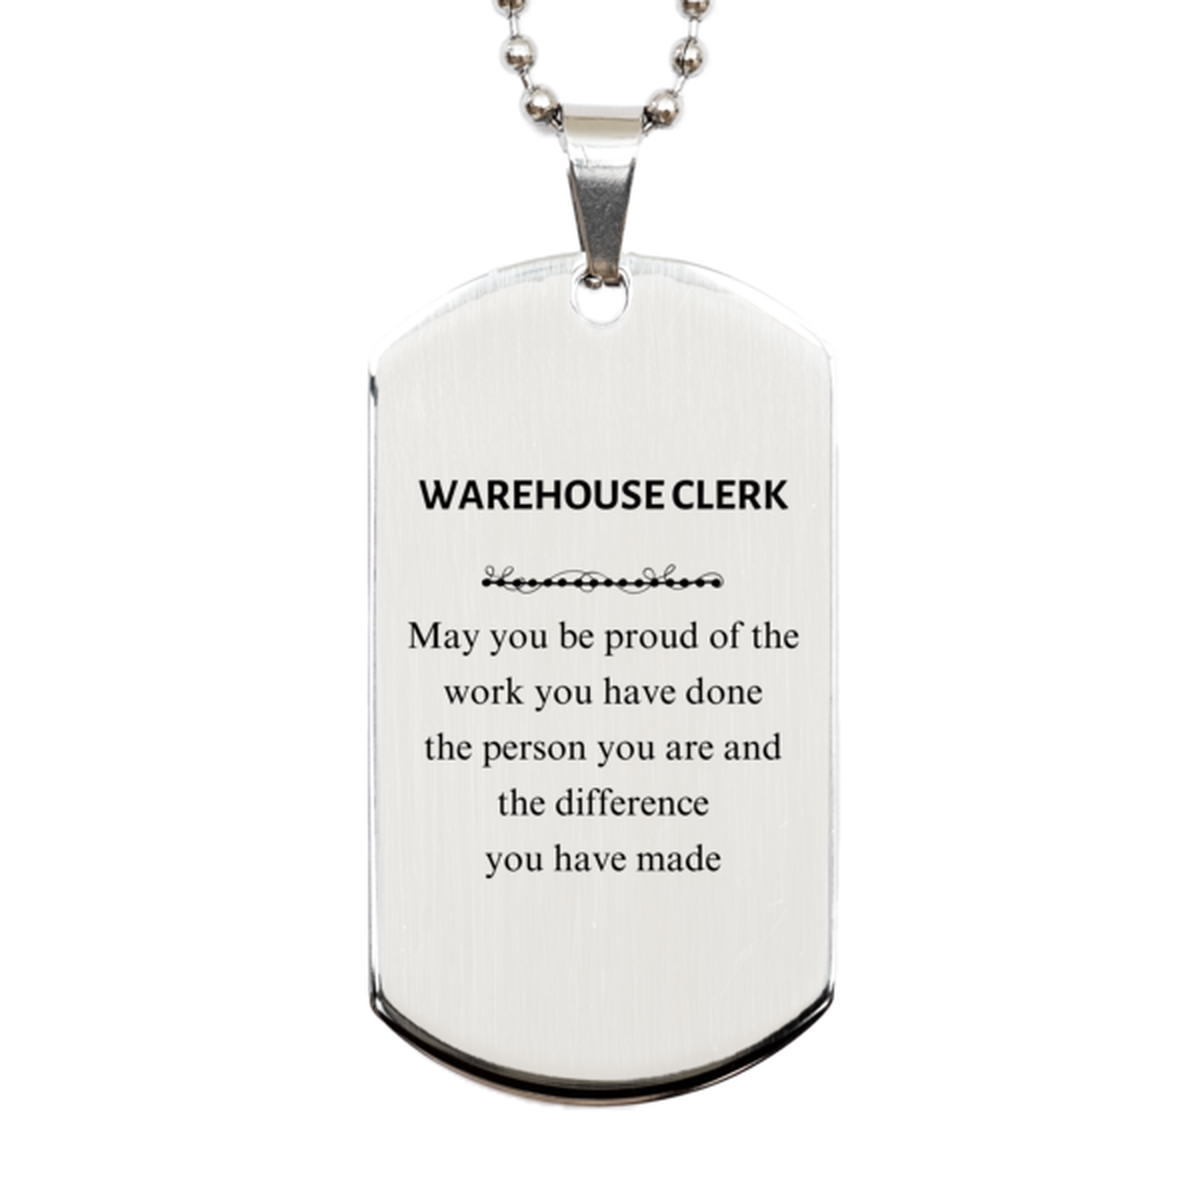 Warehouse Clerk May you be proud of the work you have done, Retirement Warehouse Clerk Silver Dog Tag for Colleague Appreciation Gifts Amazing for Warehouse Clerk